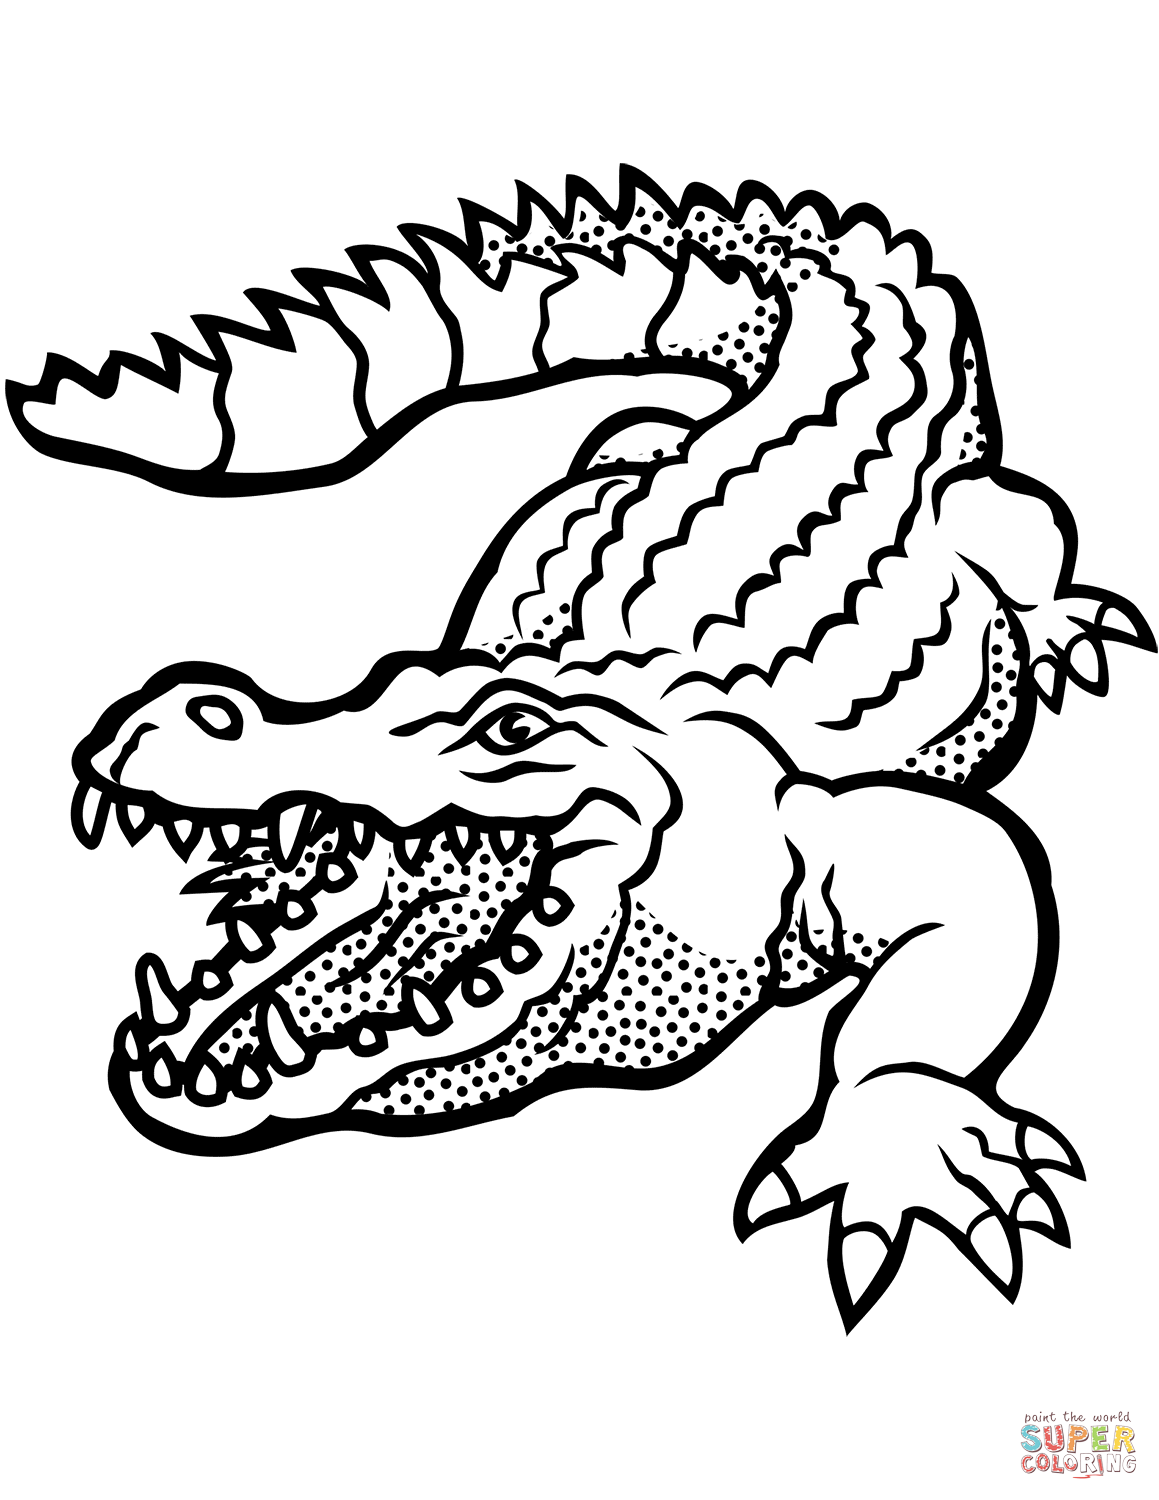 Crocodile with open mouth coloring page free printable coloring pages